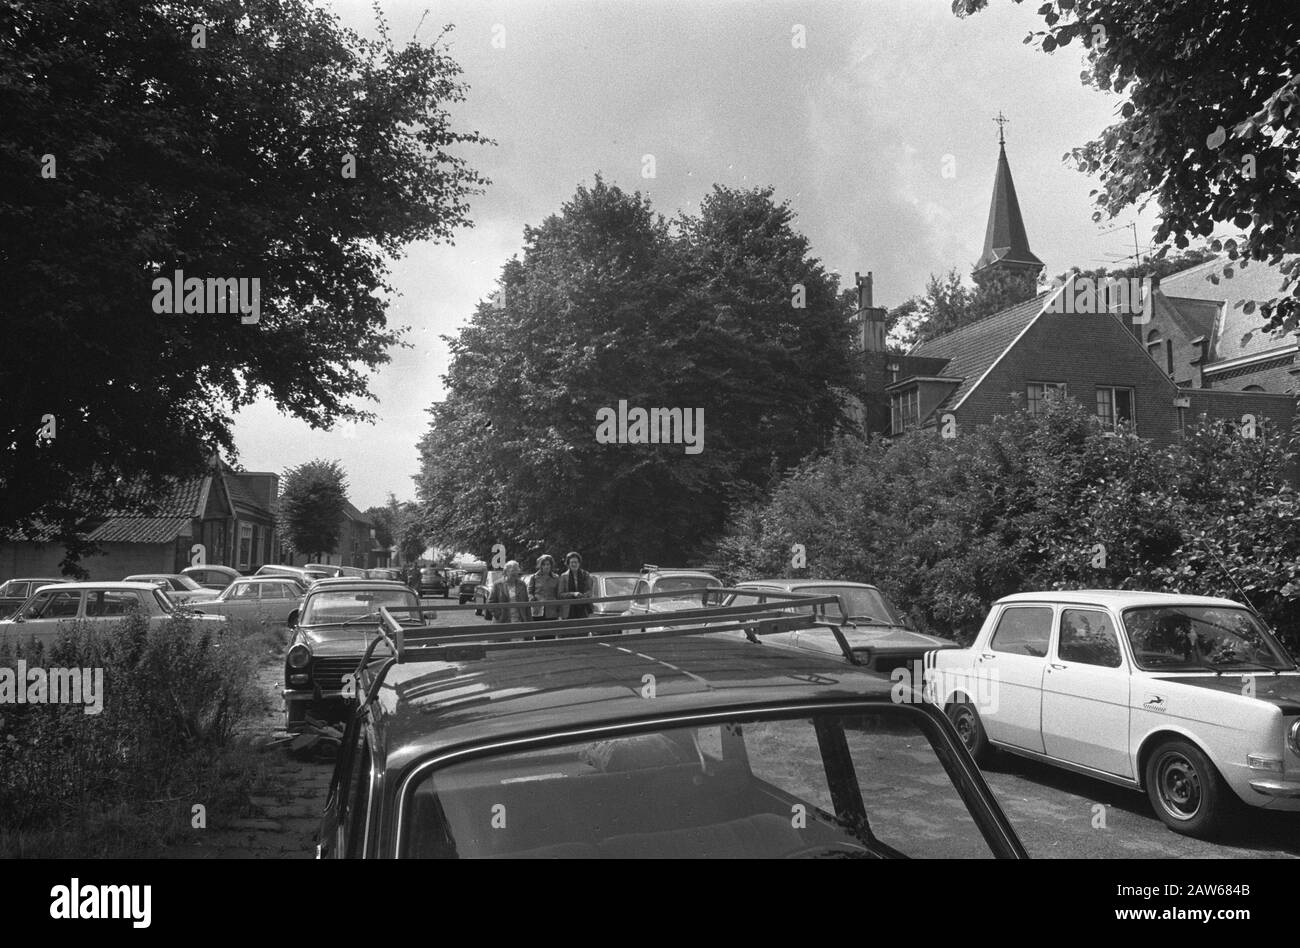 Last Mass at church Ruygoord, crowds in village Date: July 22, 1973 Location: Amsterdam, Noord-Holland, Ruigoord Keywords: villages, churches, miss Stock Photo